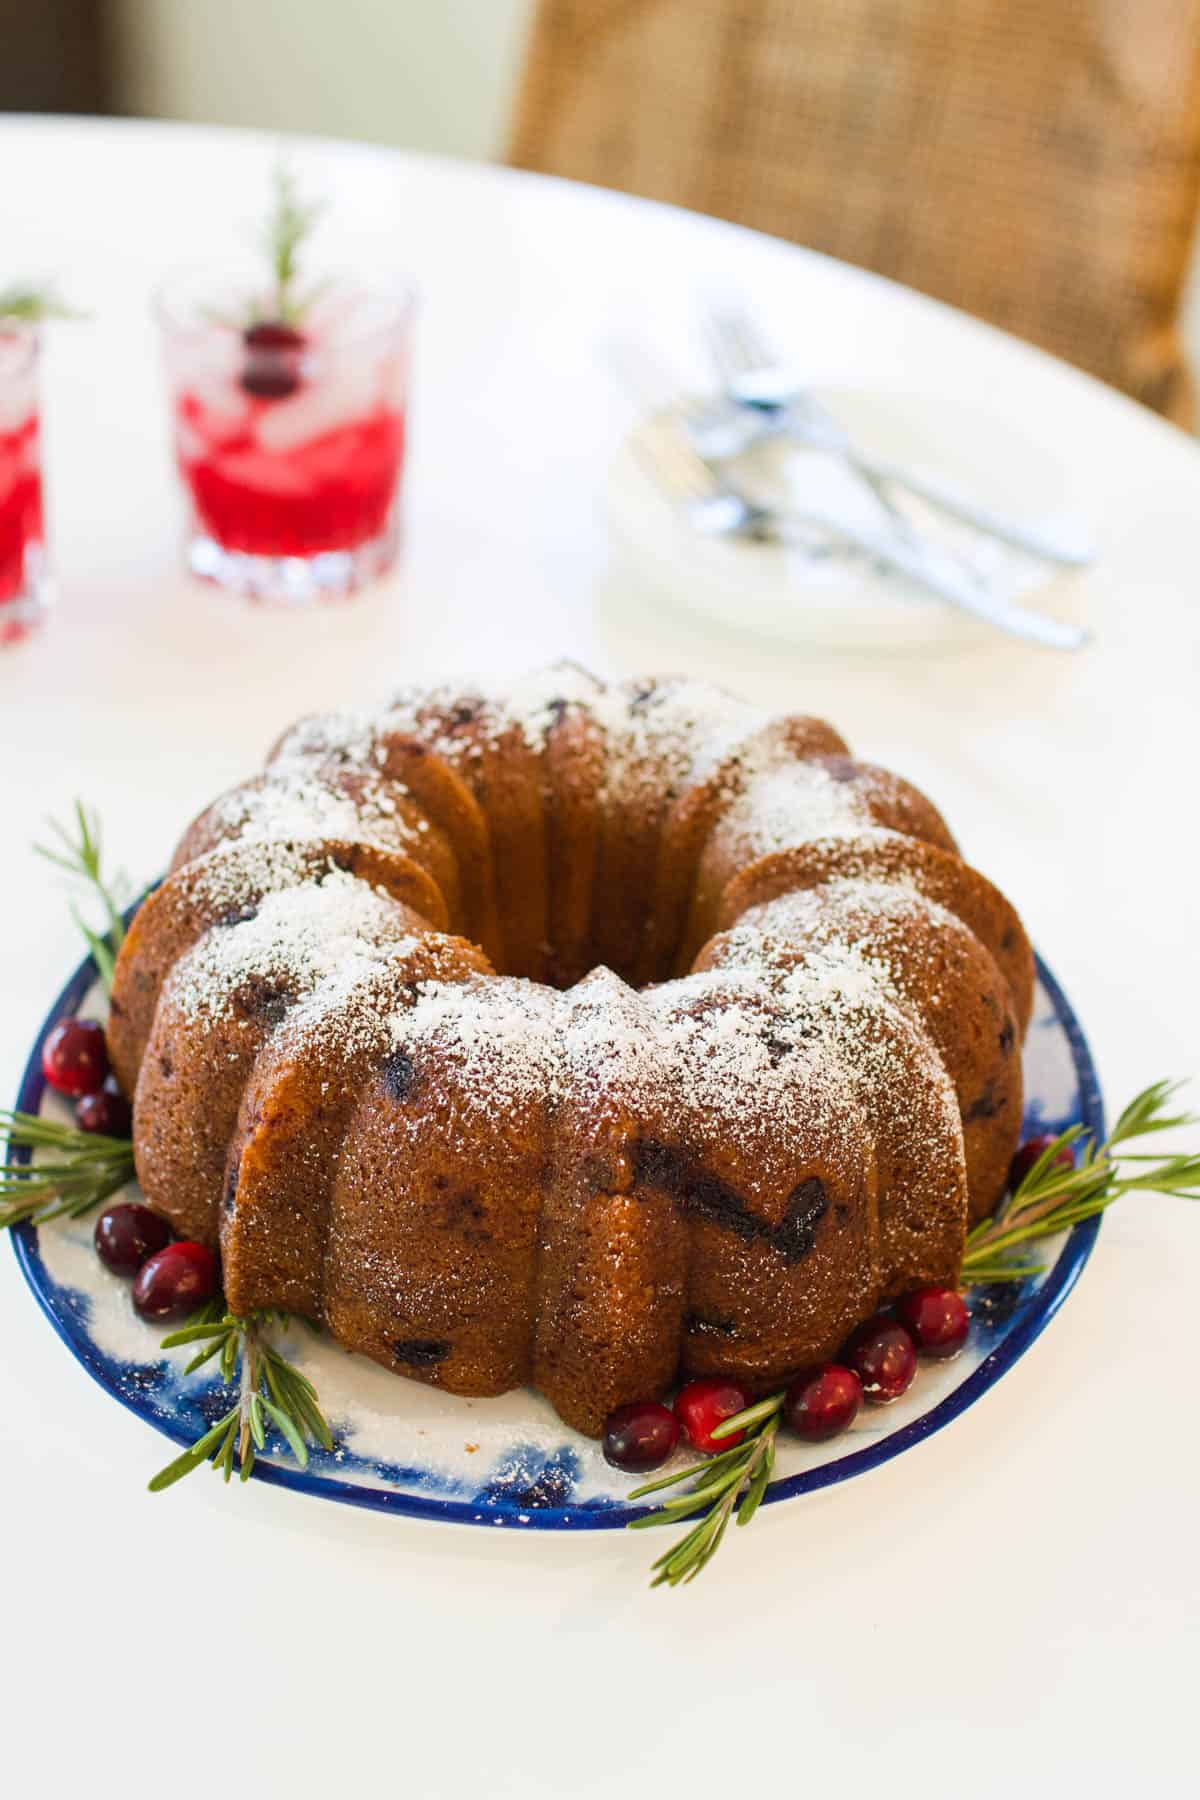 A Christmas bundt cake with cranberries.